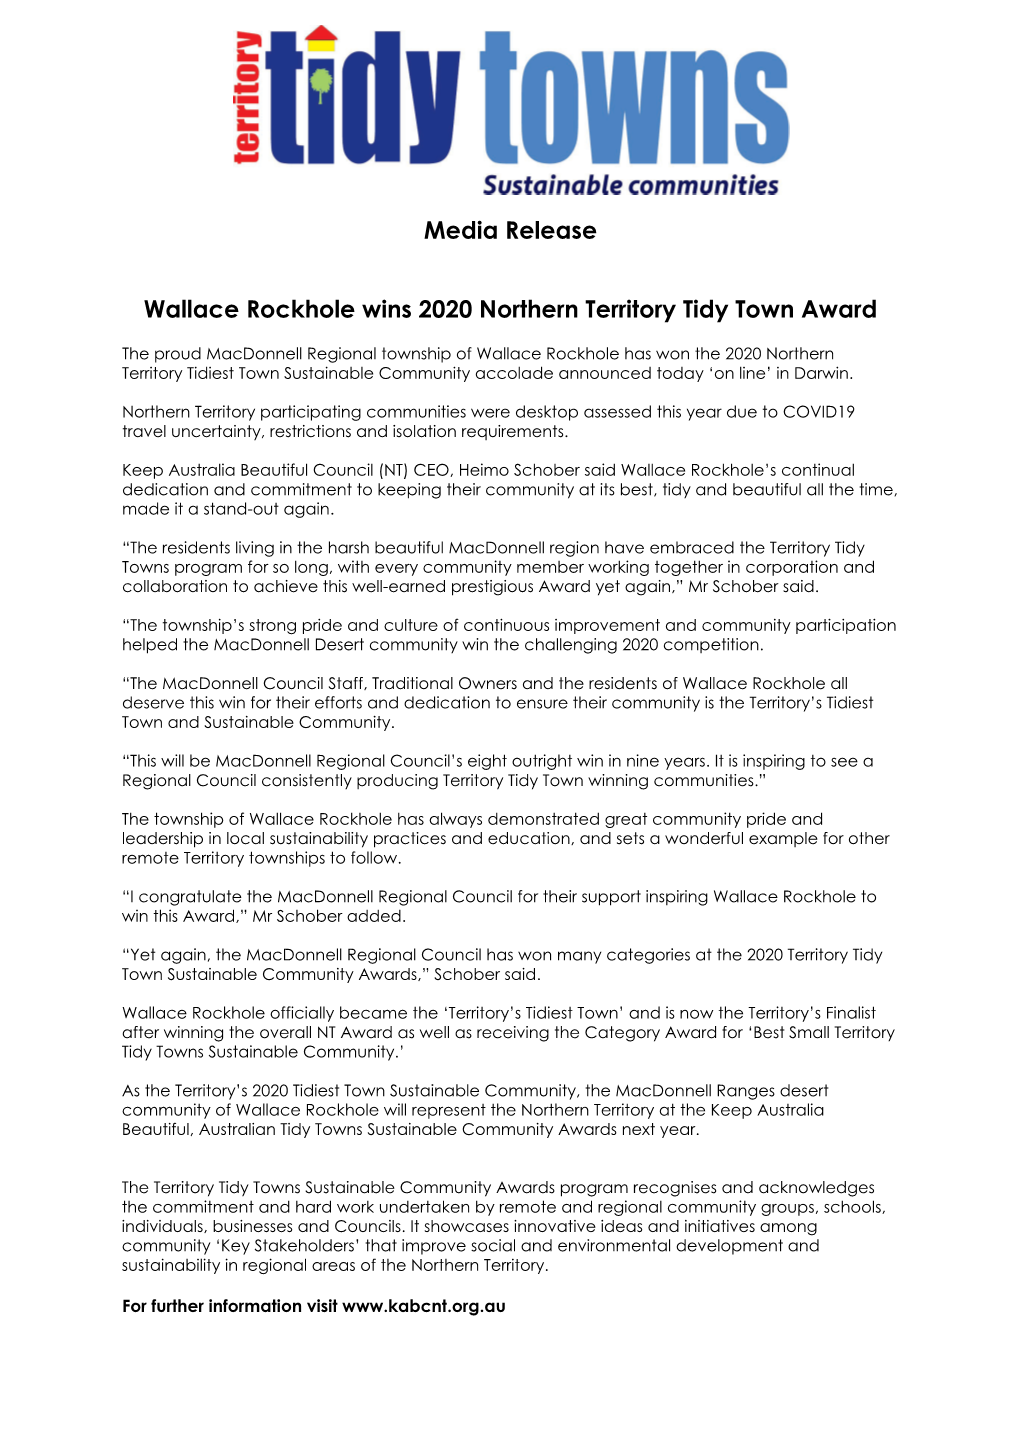 Media Release Wallace Rockhole Wins 2020 Northern Territory Tidy